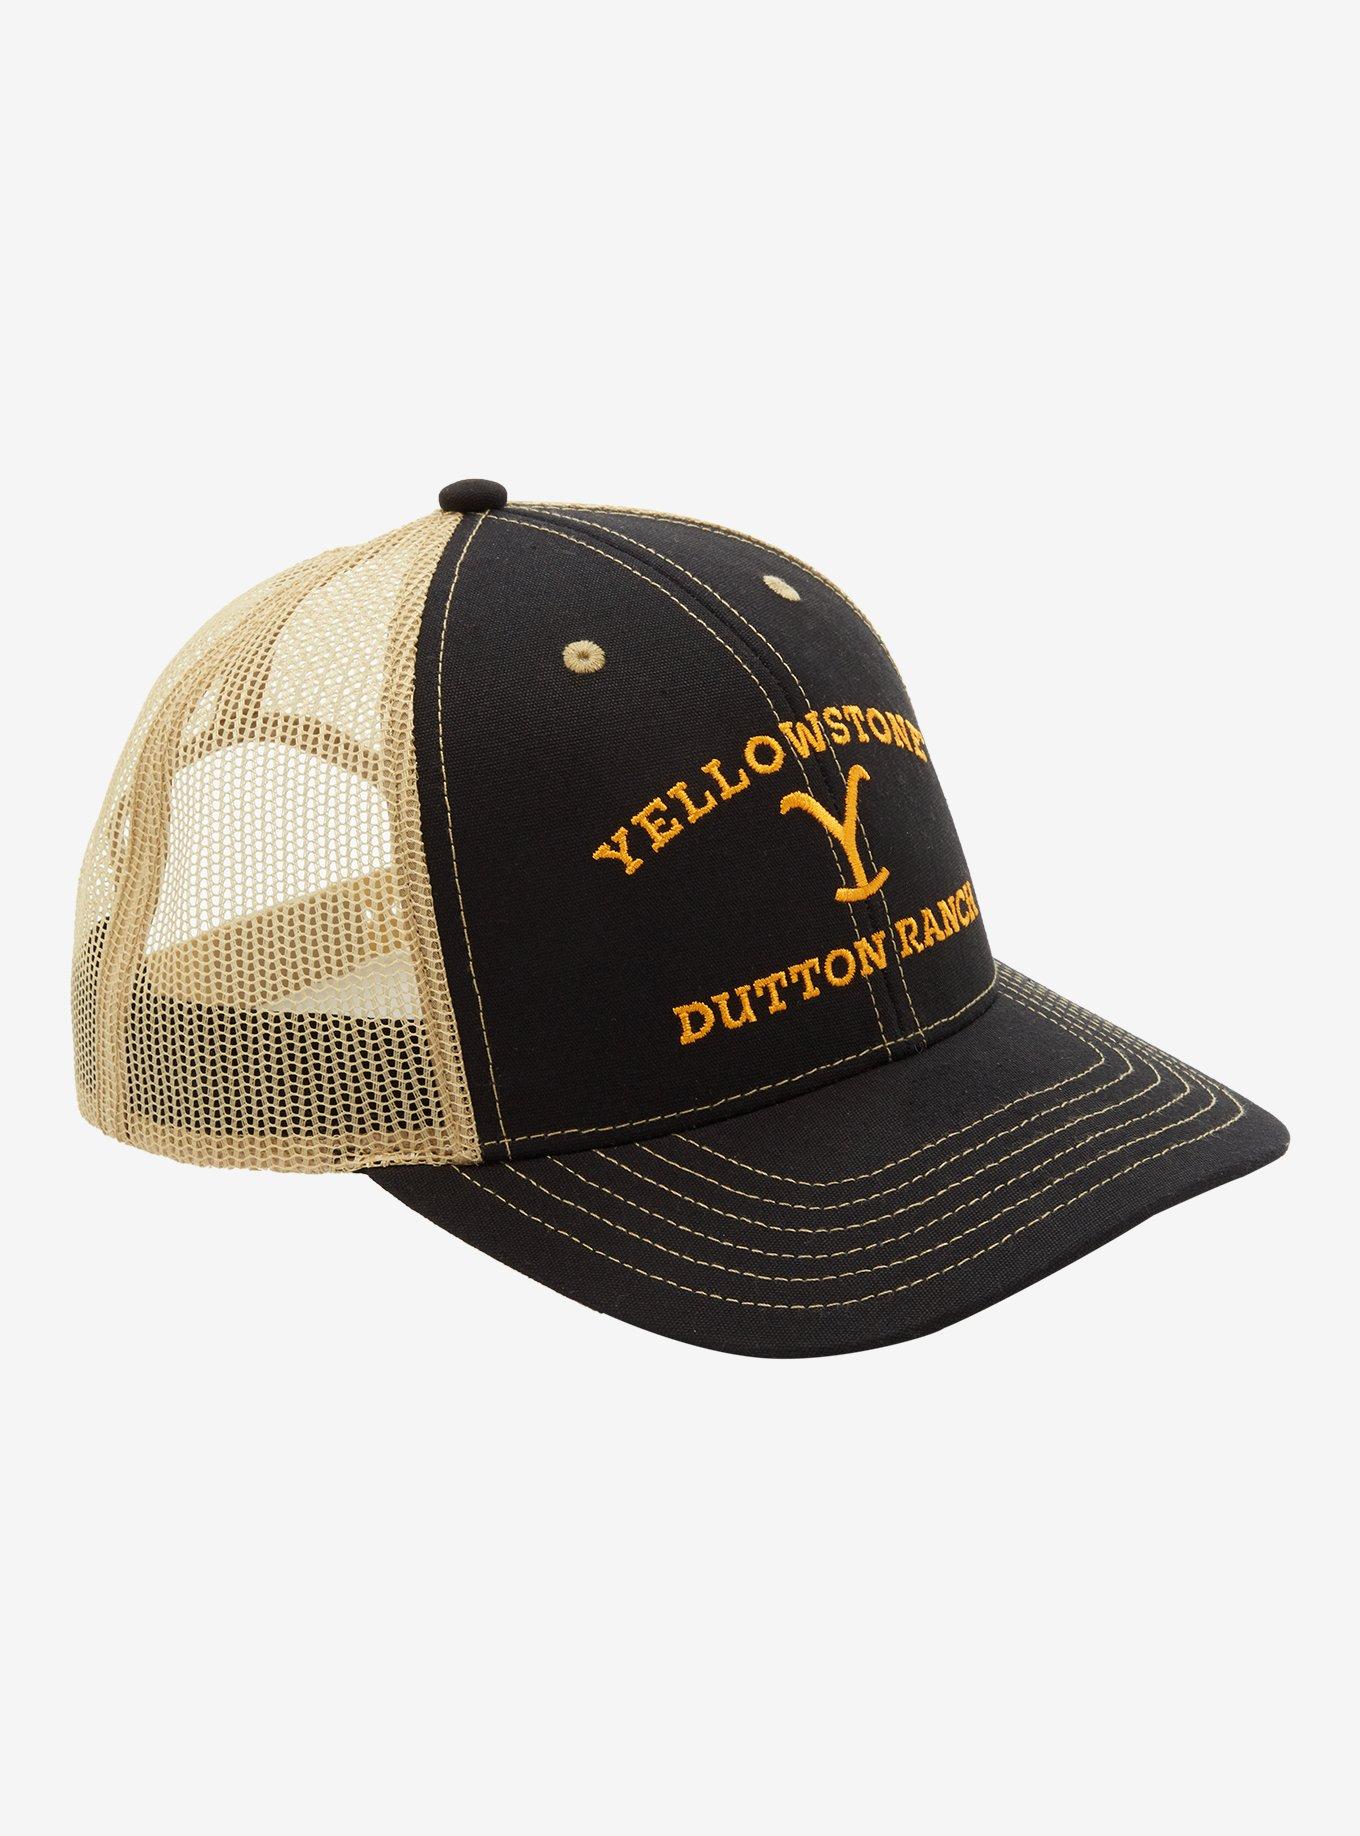 Yellowstone Dutton Ranch Logo Embroidered Trucker Hat | Hot Topic